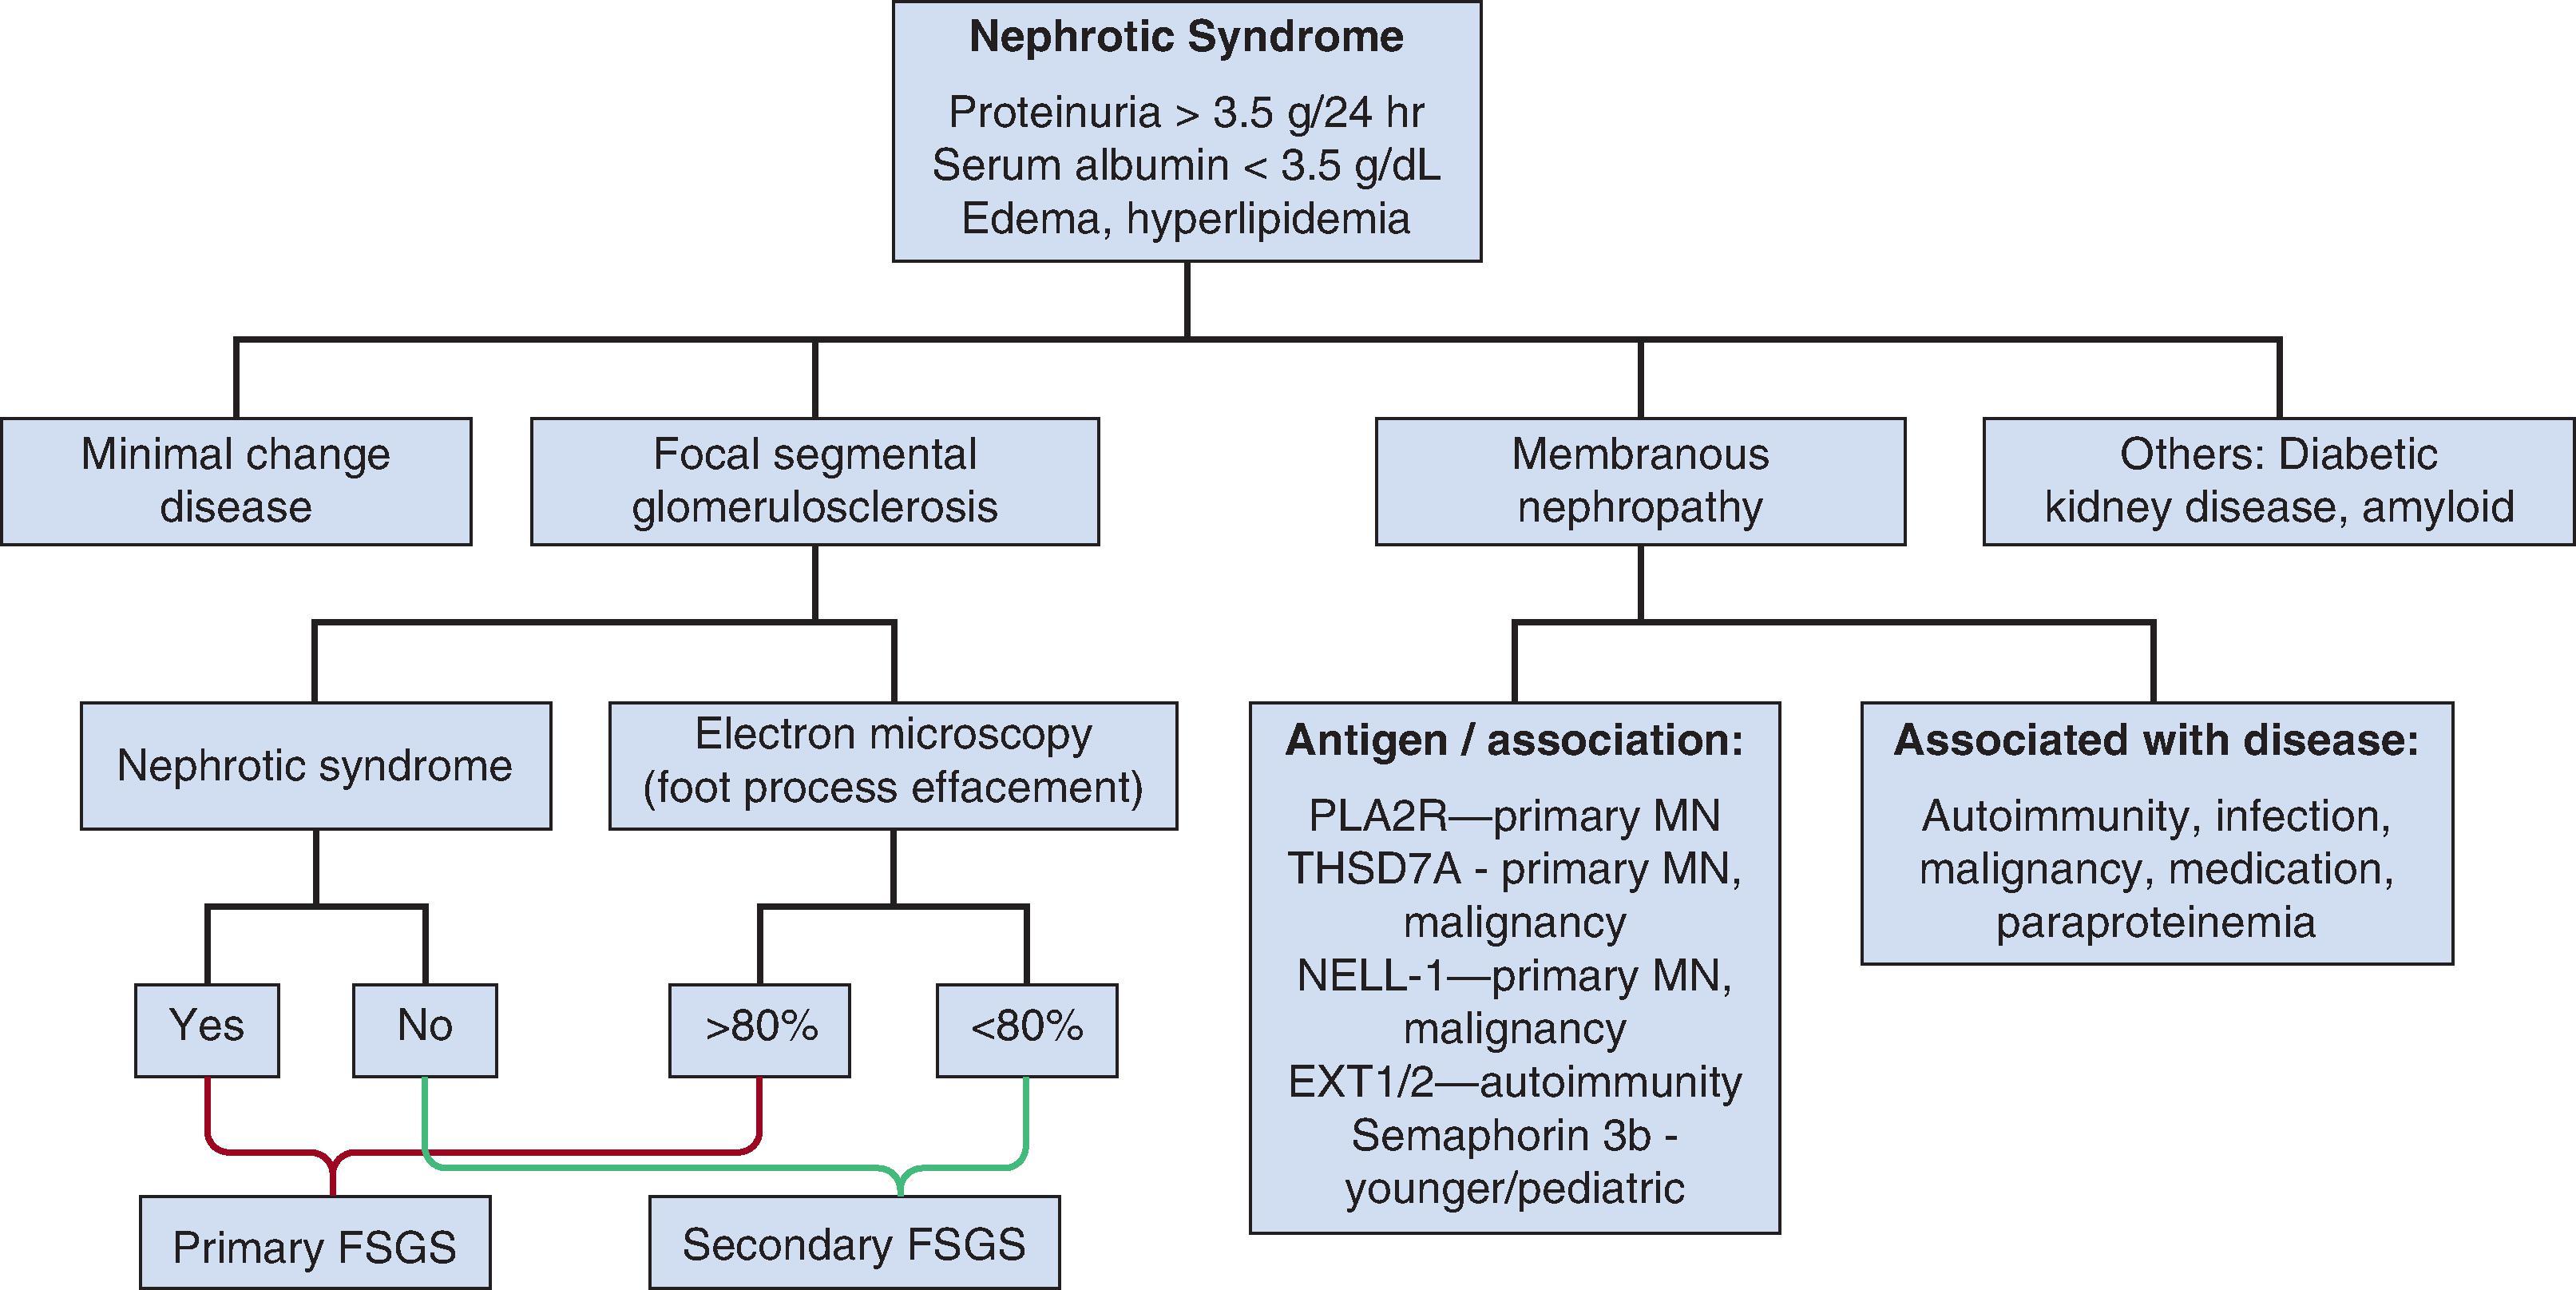 Fig. 16.1, Schematic showing the most common etiologies of nephrotic syndrome.